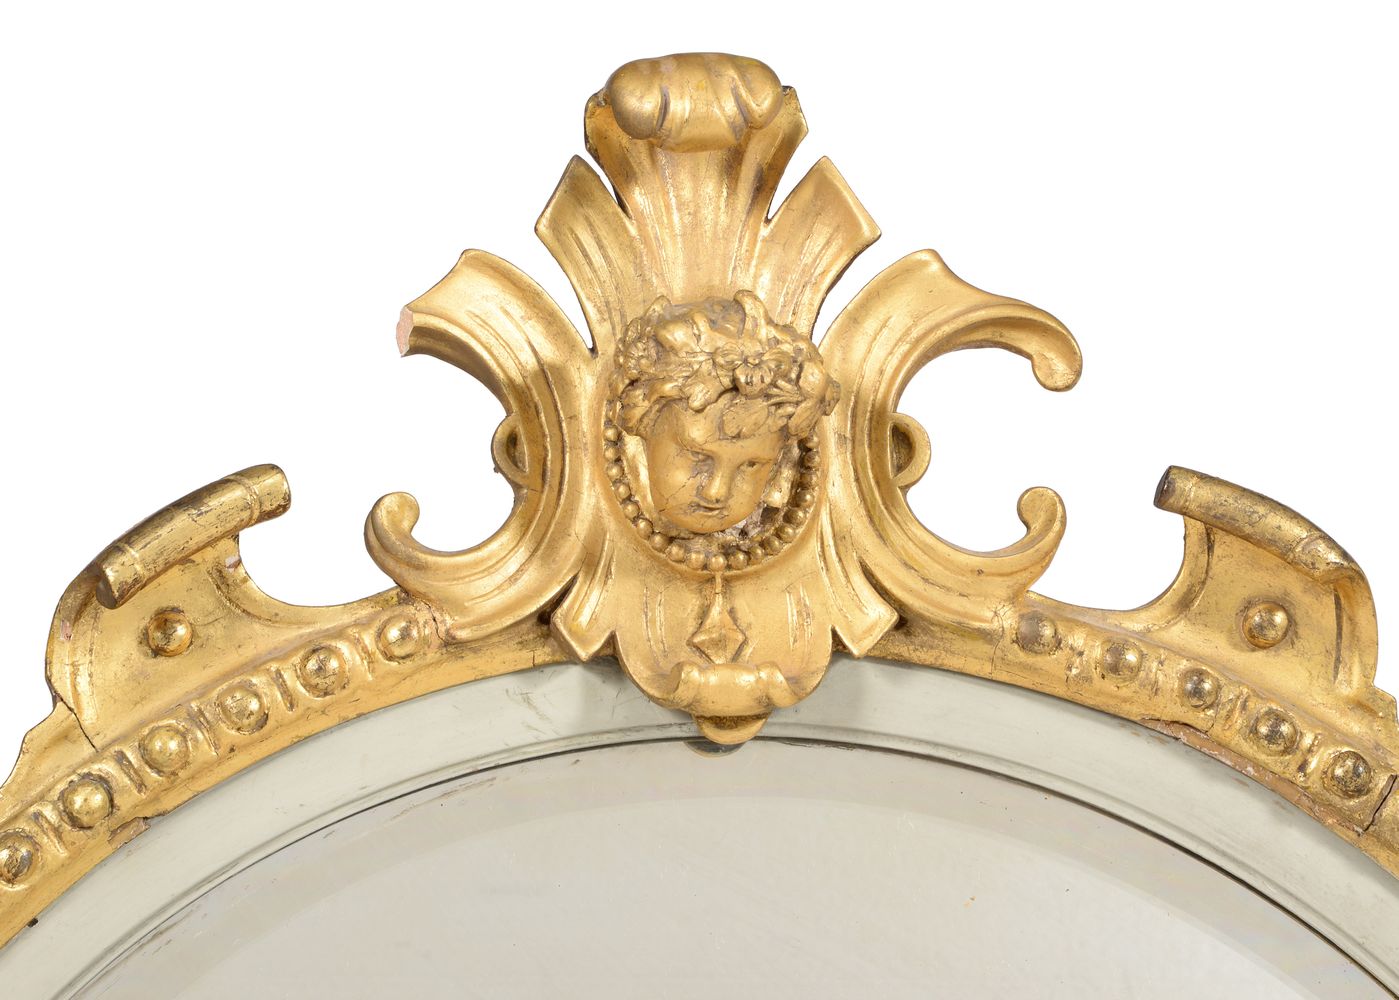 A Victorian giltwood circular wall mirror, in late 18th century style, circa 1860 - Image 2 of 4